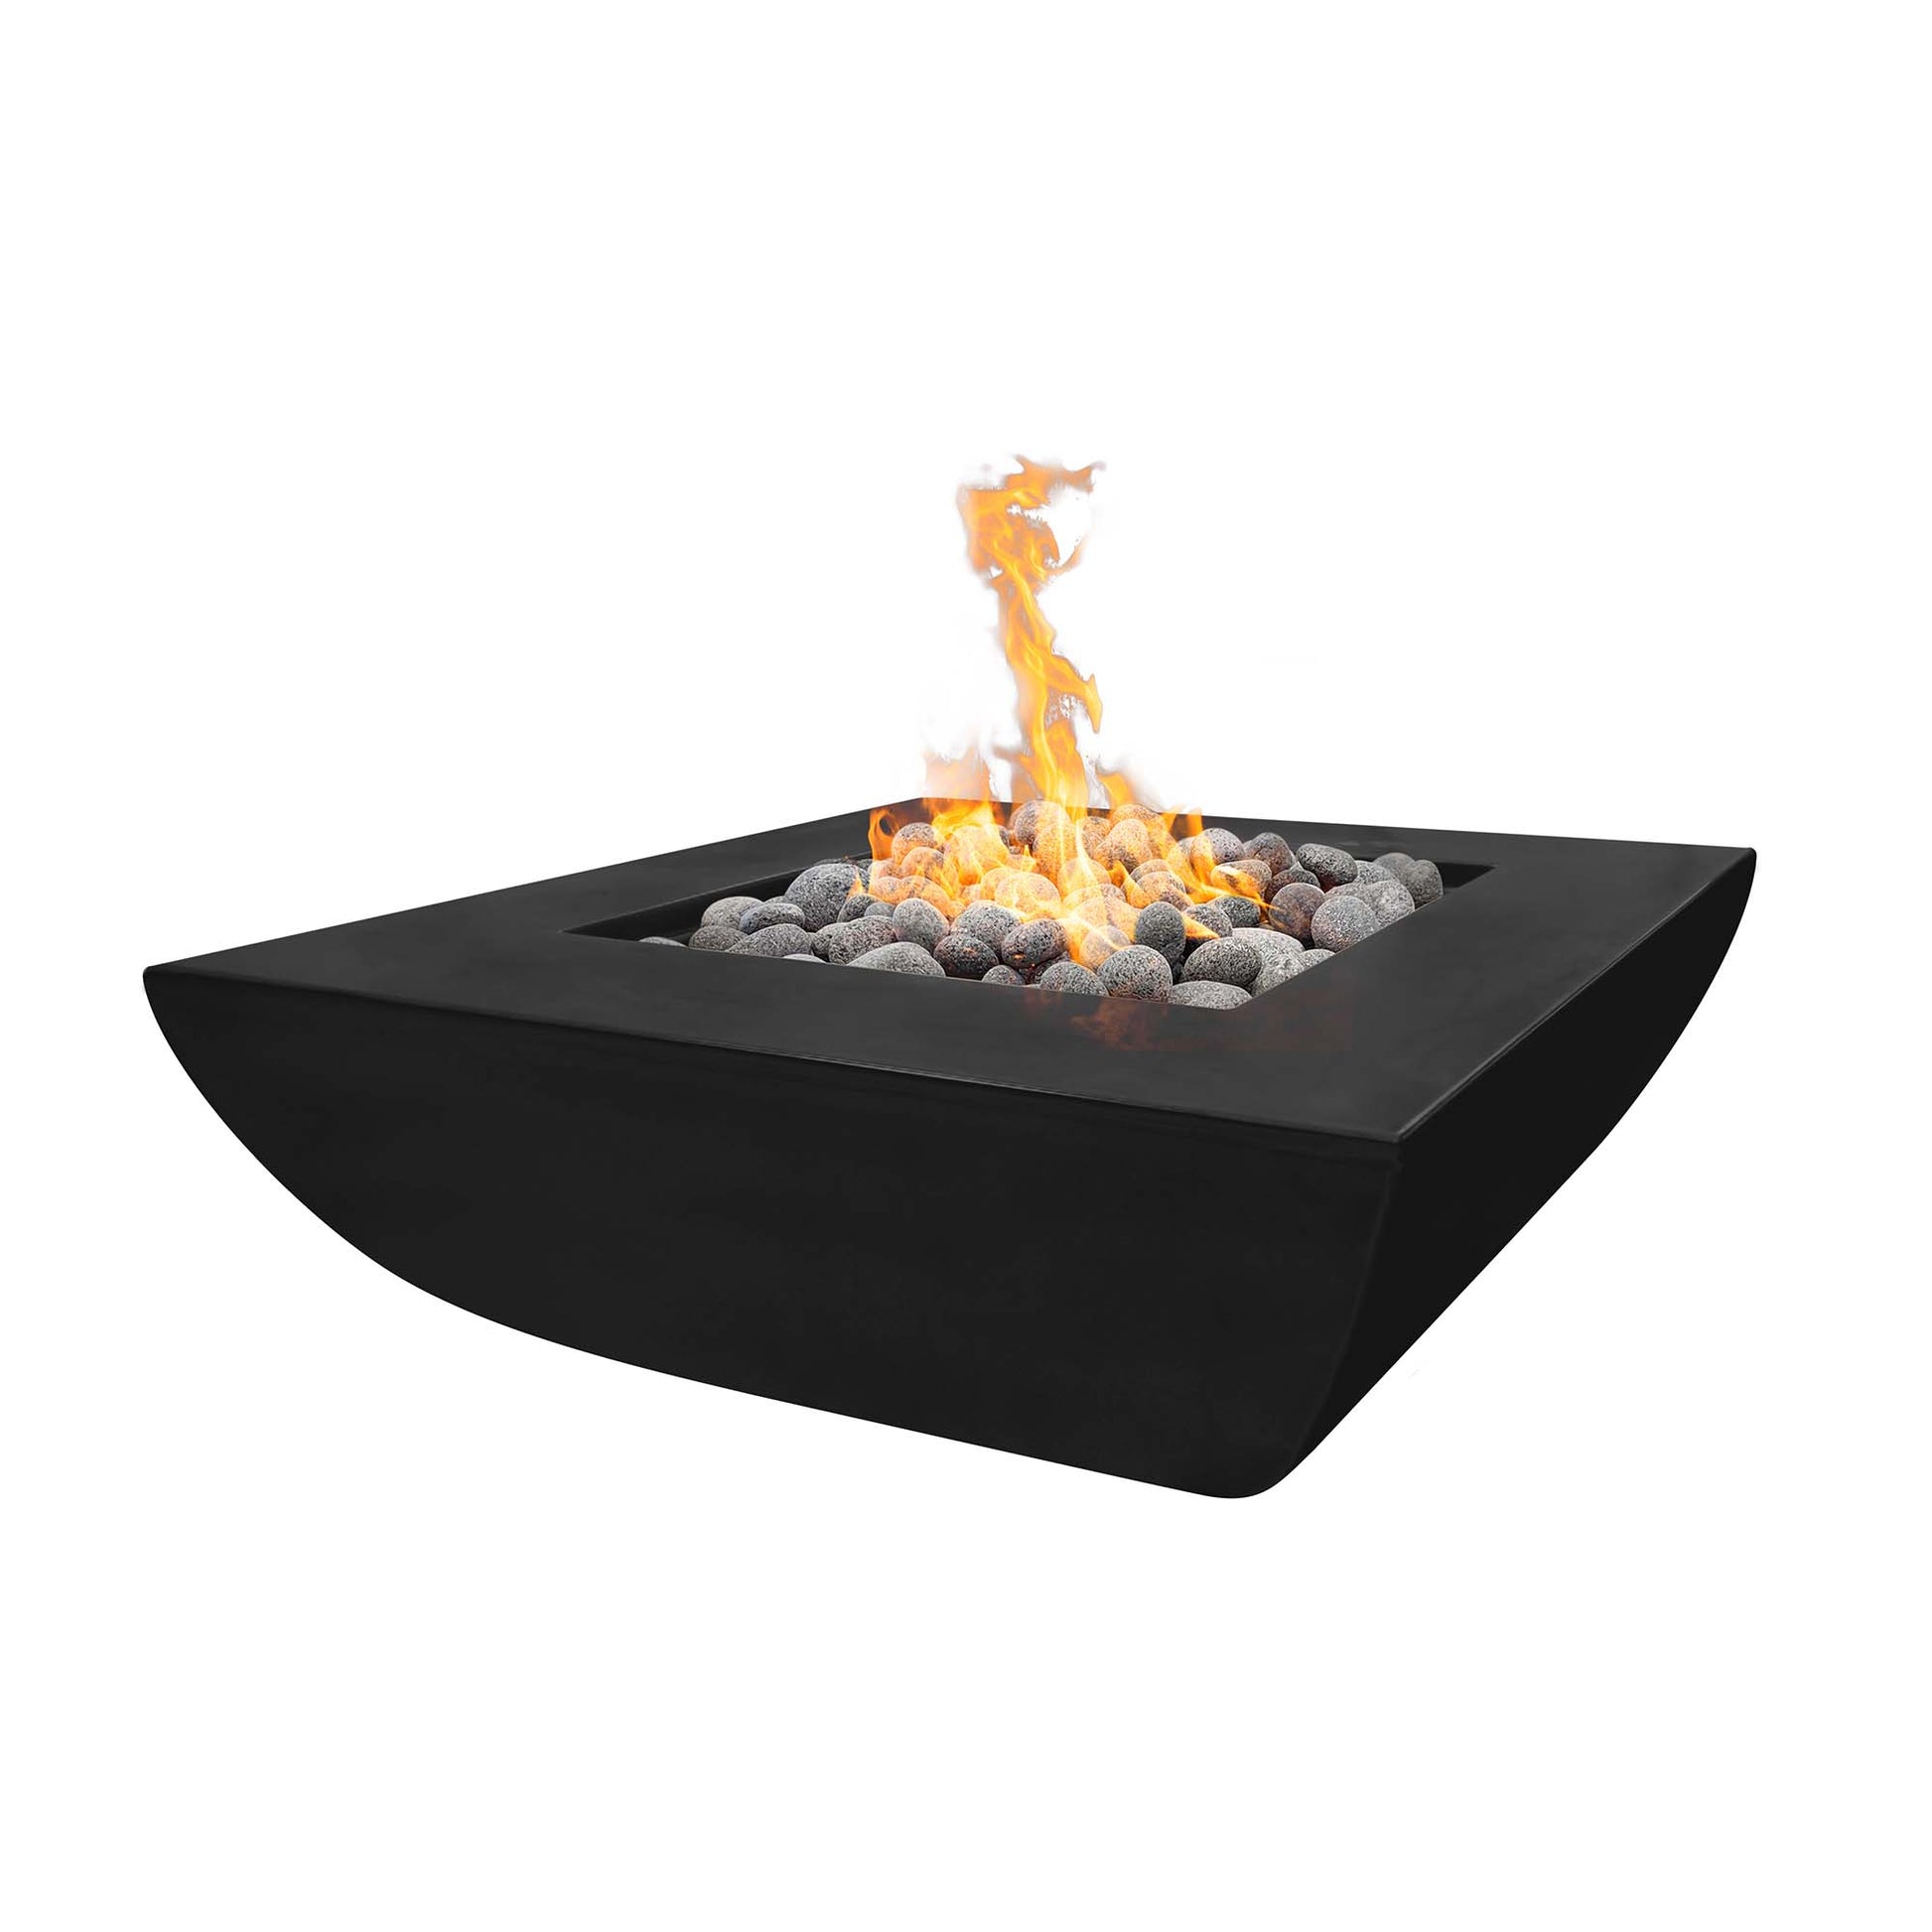 The Outdoor Plus Square Avalon 42" Metallic Slate GFRC Concrete Natural Gas Fire Pit with 110V Electronic Ignition